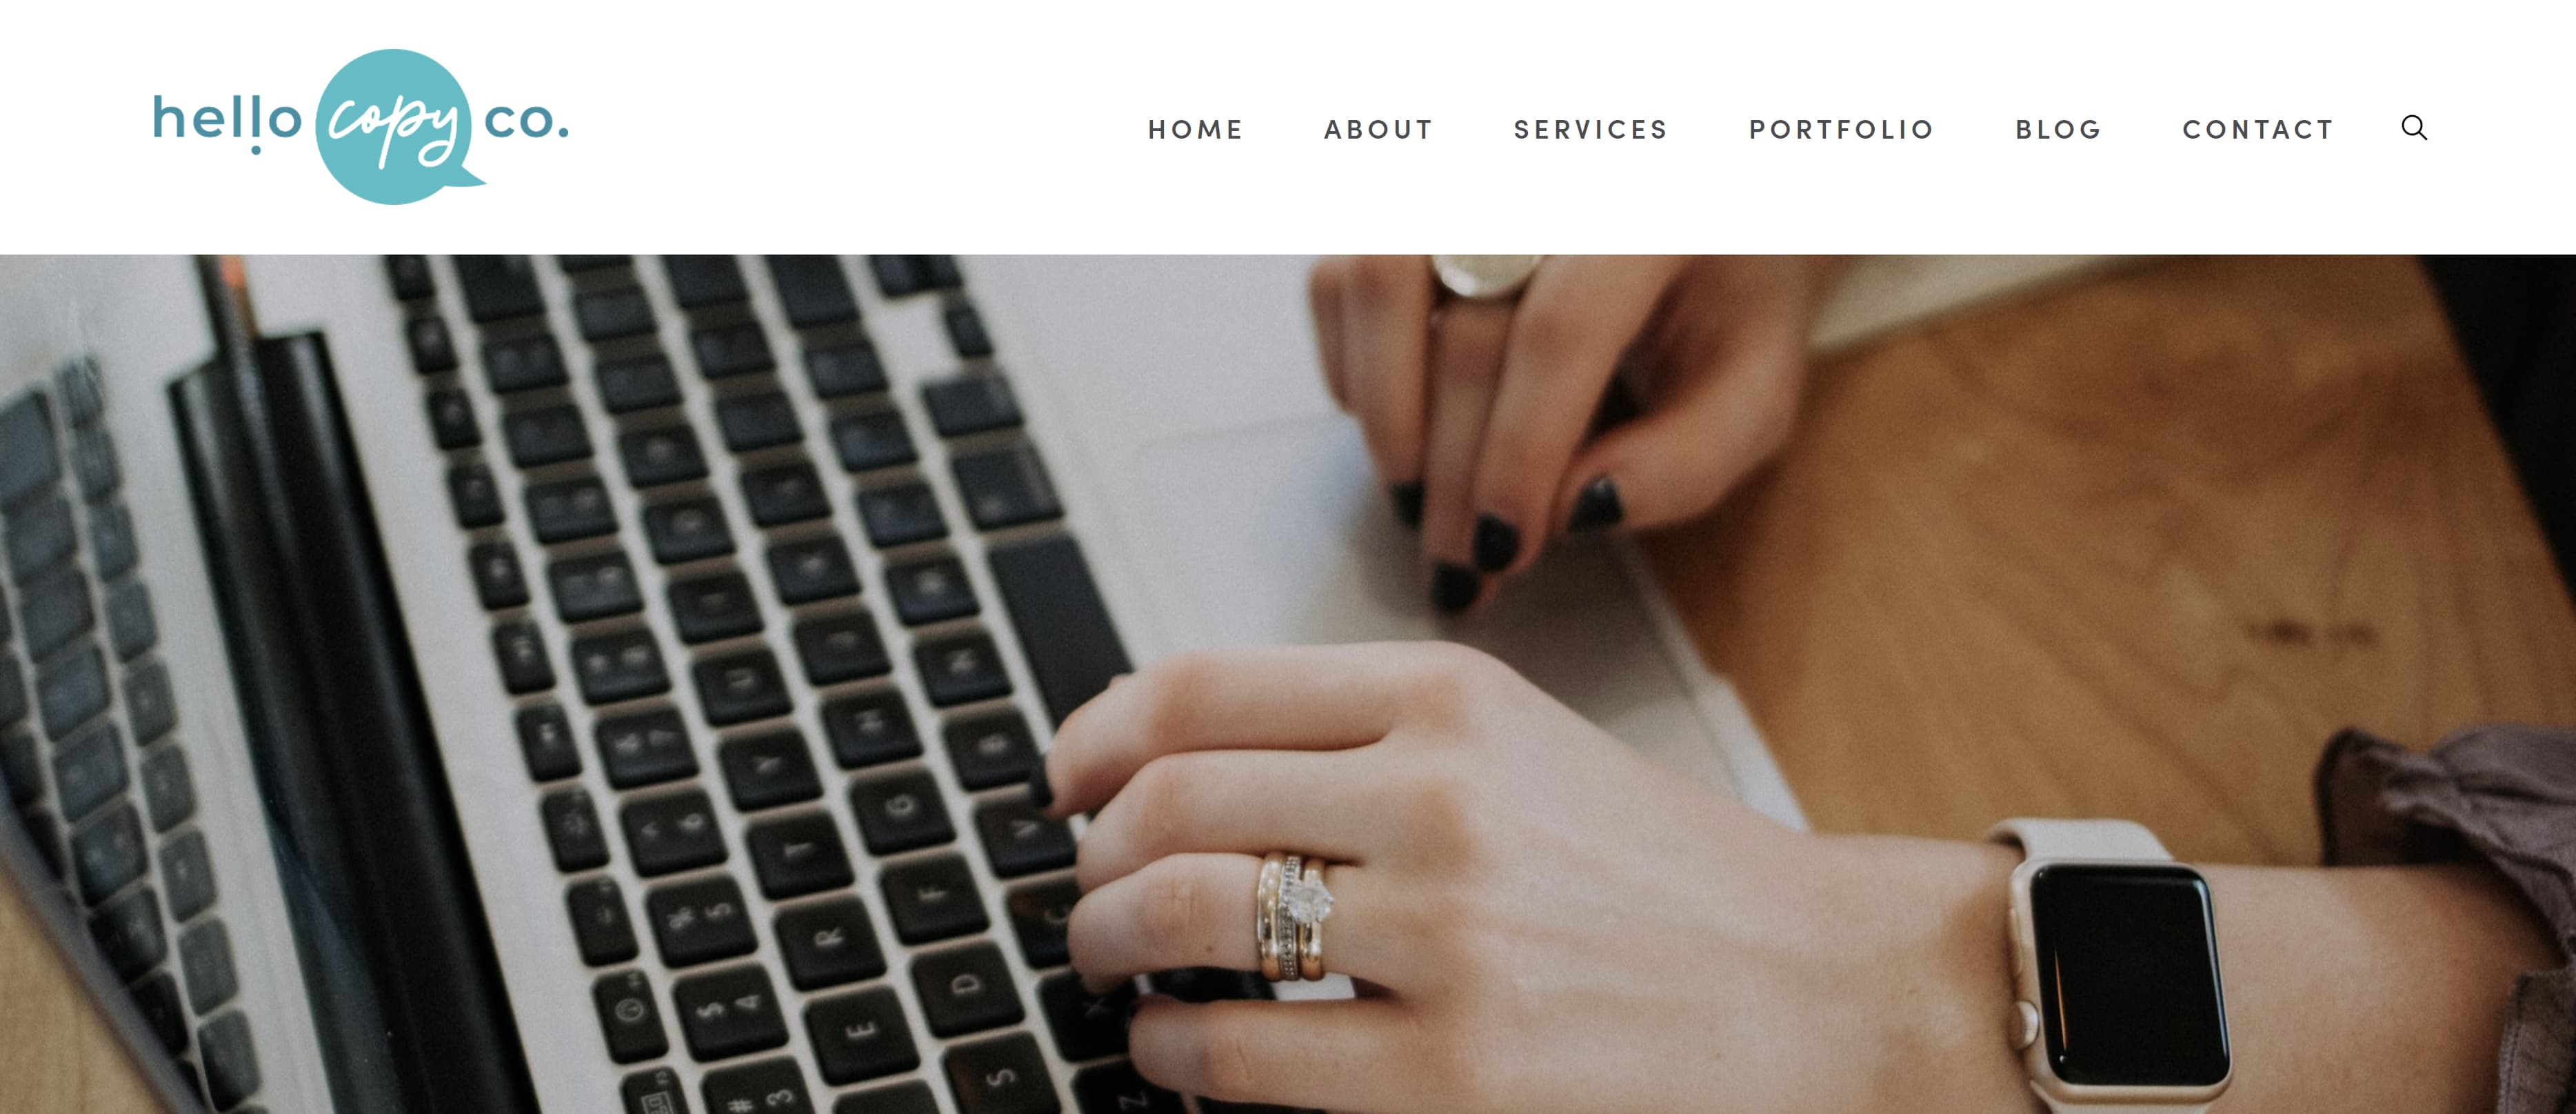 25 Copywriting Portfolio Examples That Will Secure Your Next Gig - HubSpot (Picture 22)